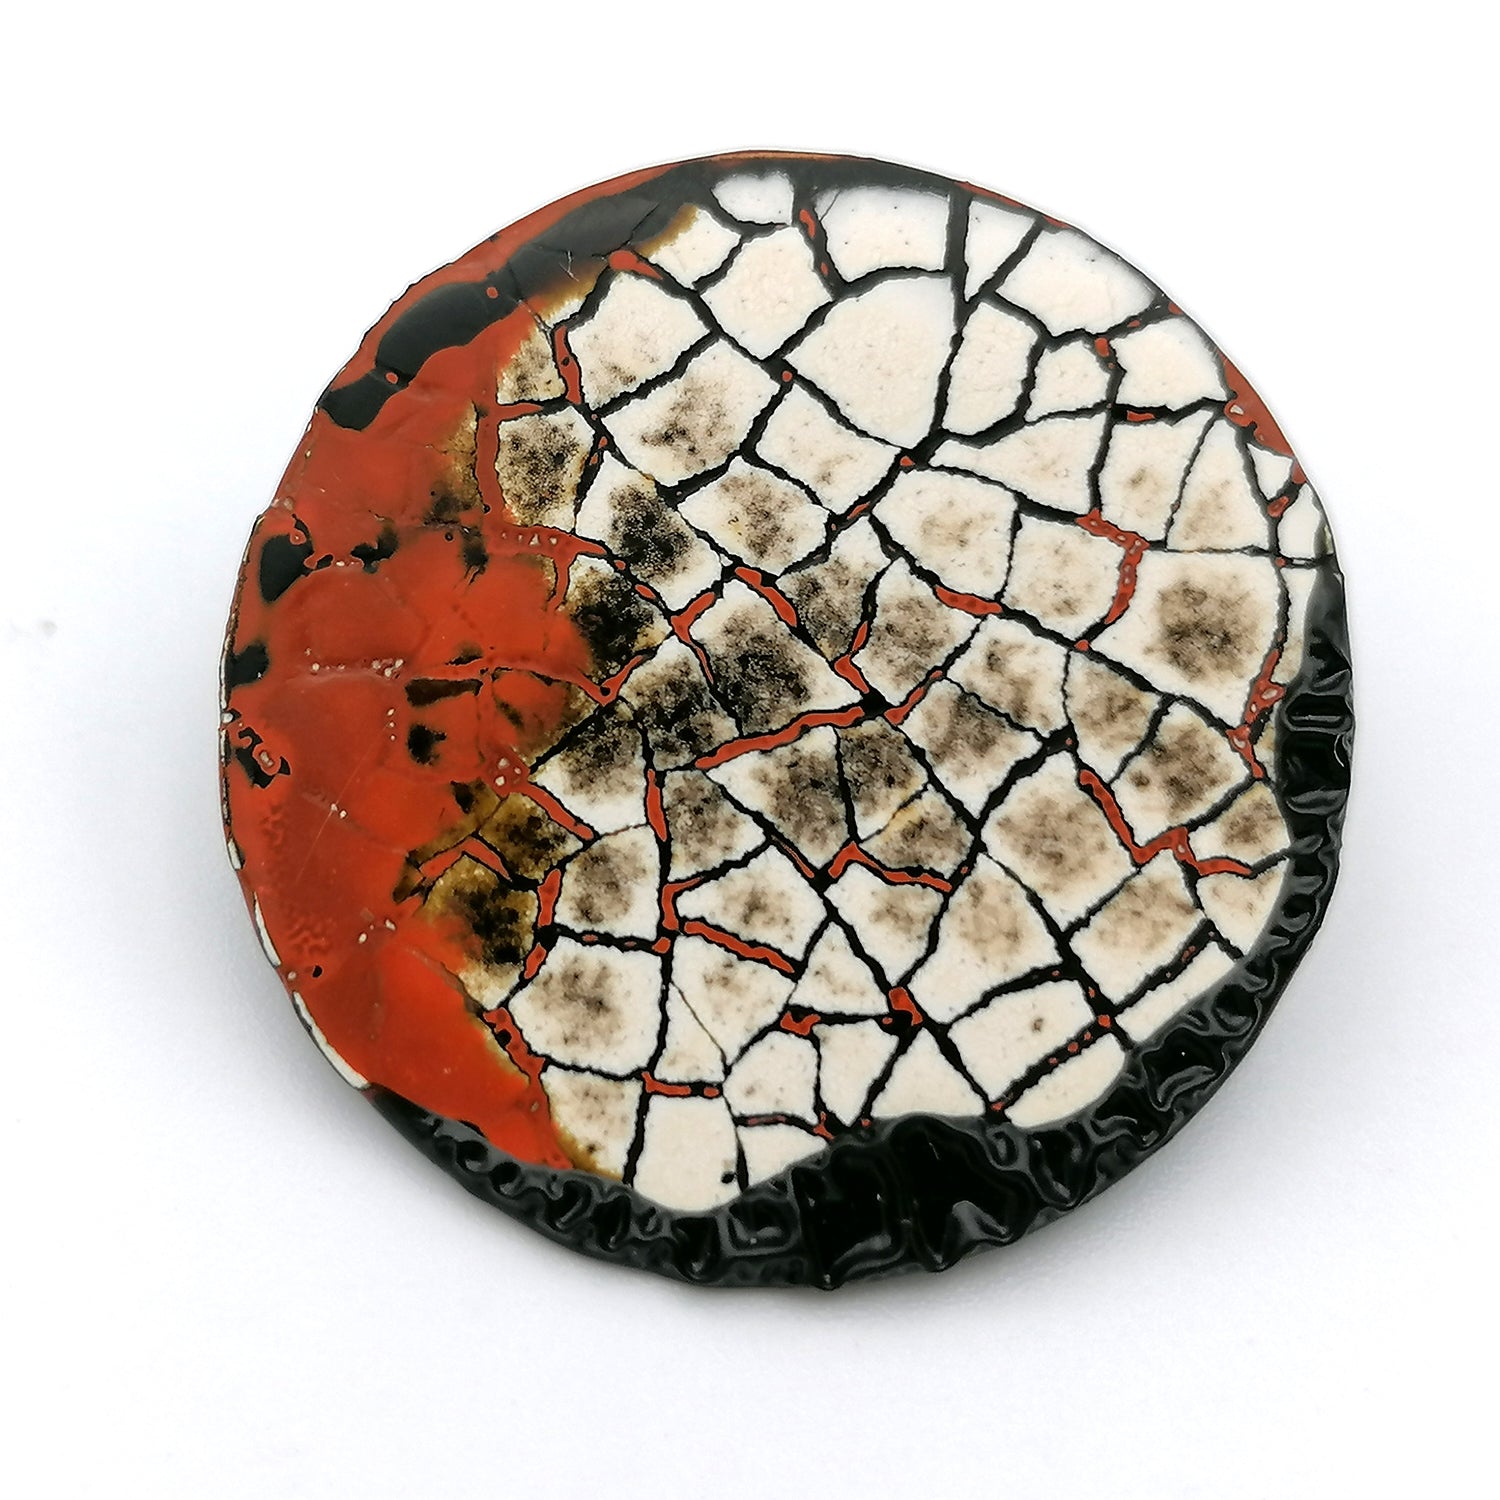 Images shows a single round stud earring on a white background. Modern mosaic earrings made out of real eggshell and black lacquer with an area of raised black wrinkled texture and patches of red.